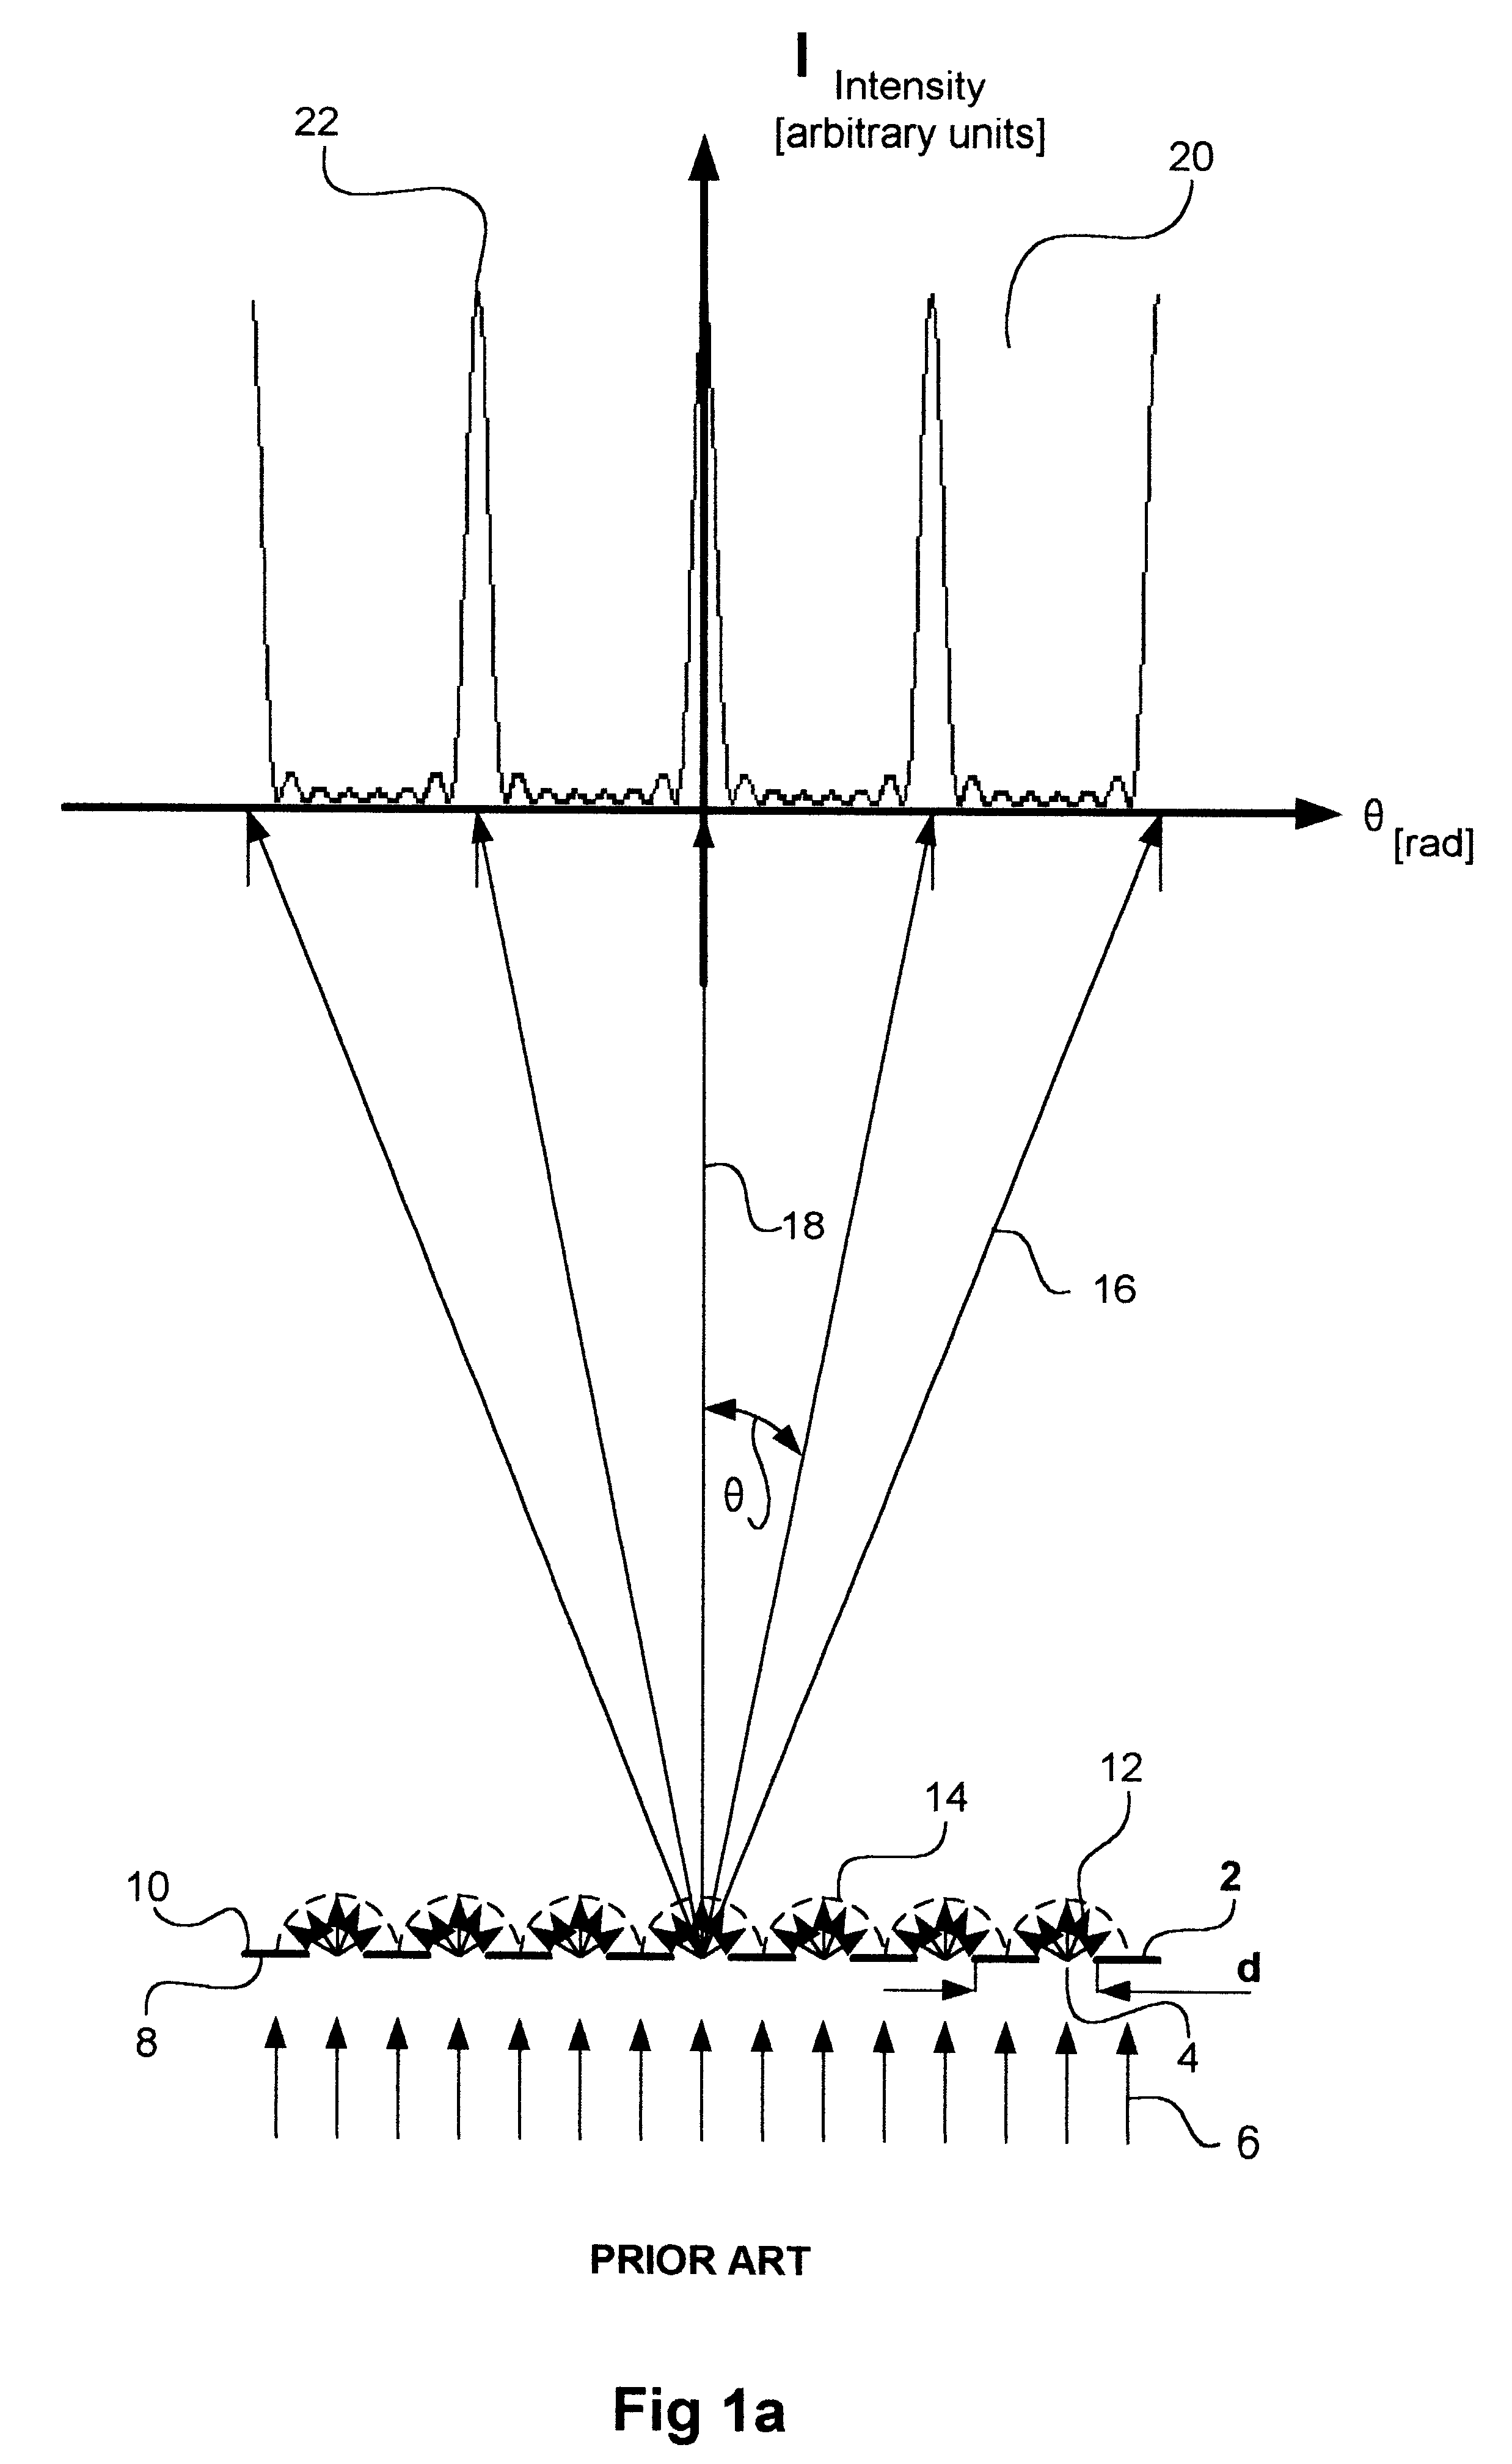 All optical narrow pulse generator and switch for dense time division multiplexing and code division multiplexing